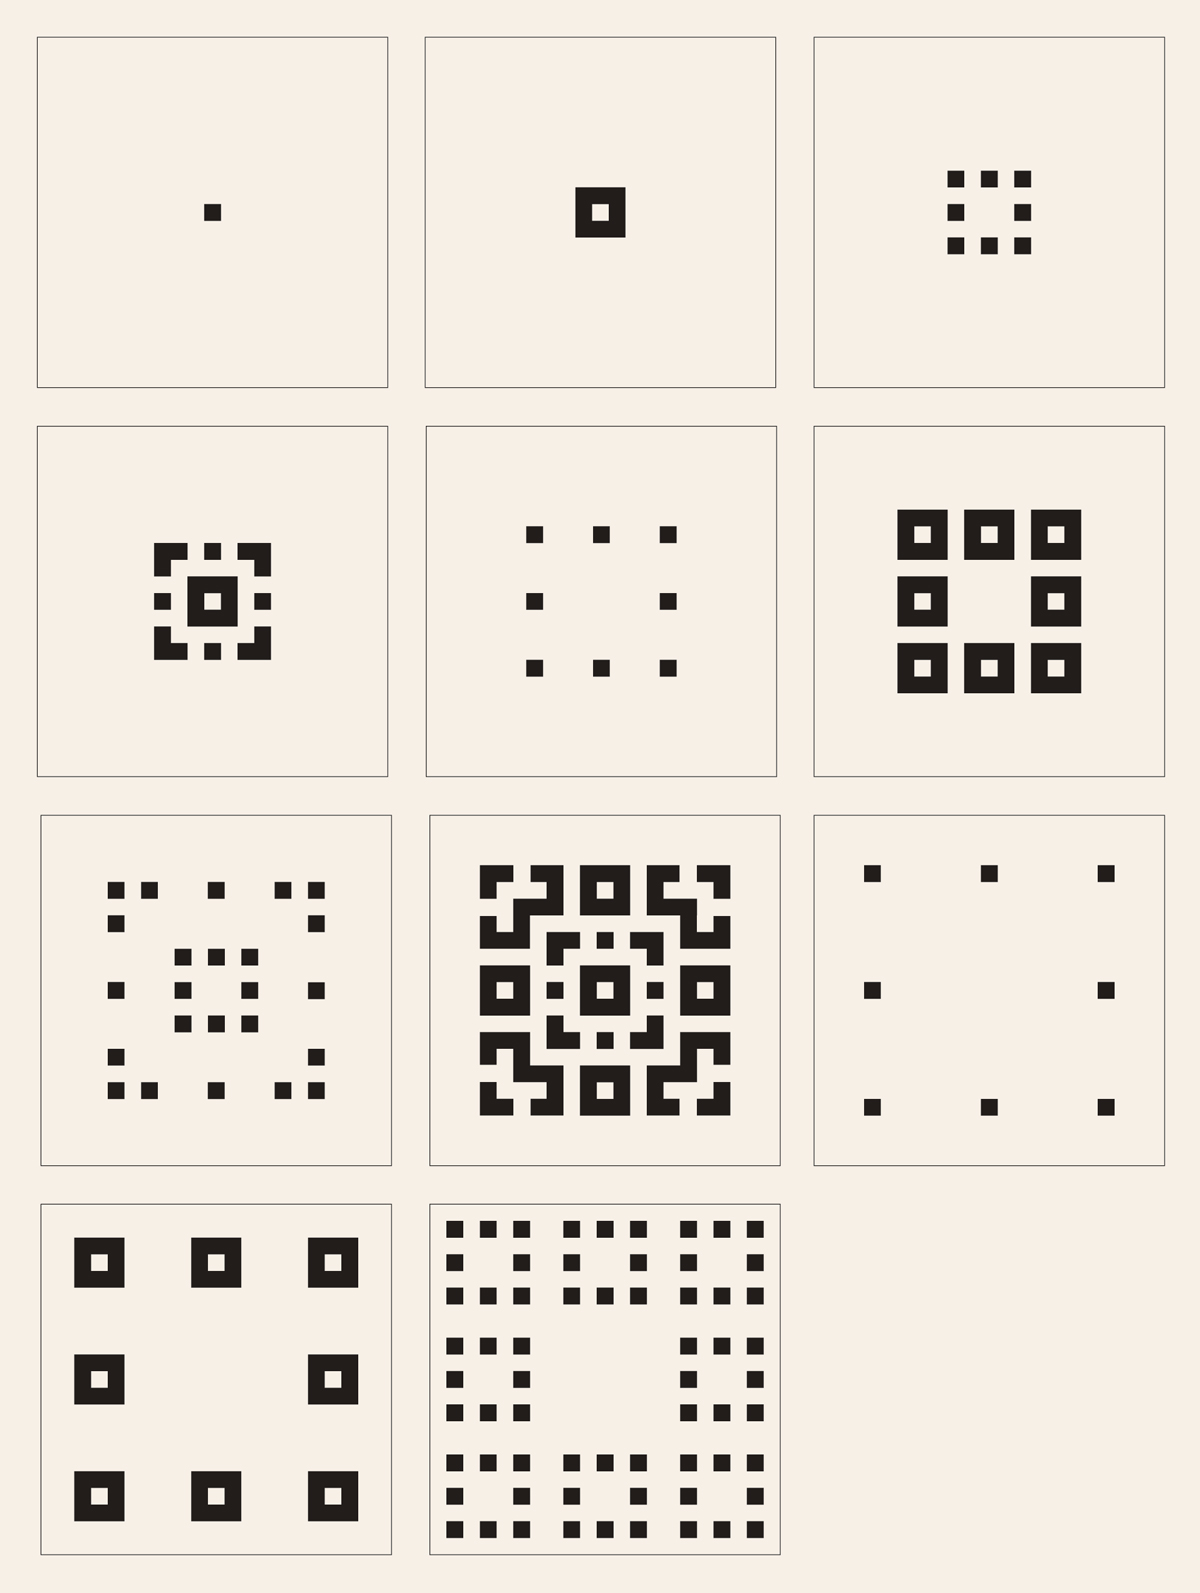 Cellular automata are systems consisting of an array of squares, each of which may be either on (black) or off (white). Mathematicians model such systems on computers. For each iteration of the sequence, every square changes color according to a set of rules based on the colors of its neighboring squares. For example, a square might change from on to off if all the squares surrounding it are off. The diagrams here illustrate the first eleven steps of the so-called Fredkin replicator, a cellular automaton in which numerical patterns repeat in a mysterious way. The replicator operates according to one rule: in each new iteration, a cell will be on if, and only if, in the previous iteration an odd number of its surrounding squares were on. Thus, sequence A160239, which counts the number of on squares in each iteration of the Fredkin replicator, begins 1, 8, 8, 24, 8, 64, 24, 112, 8, 64, 64.